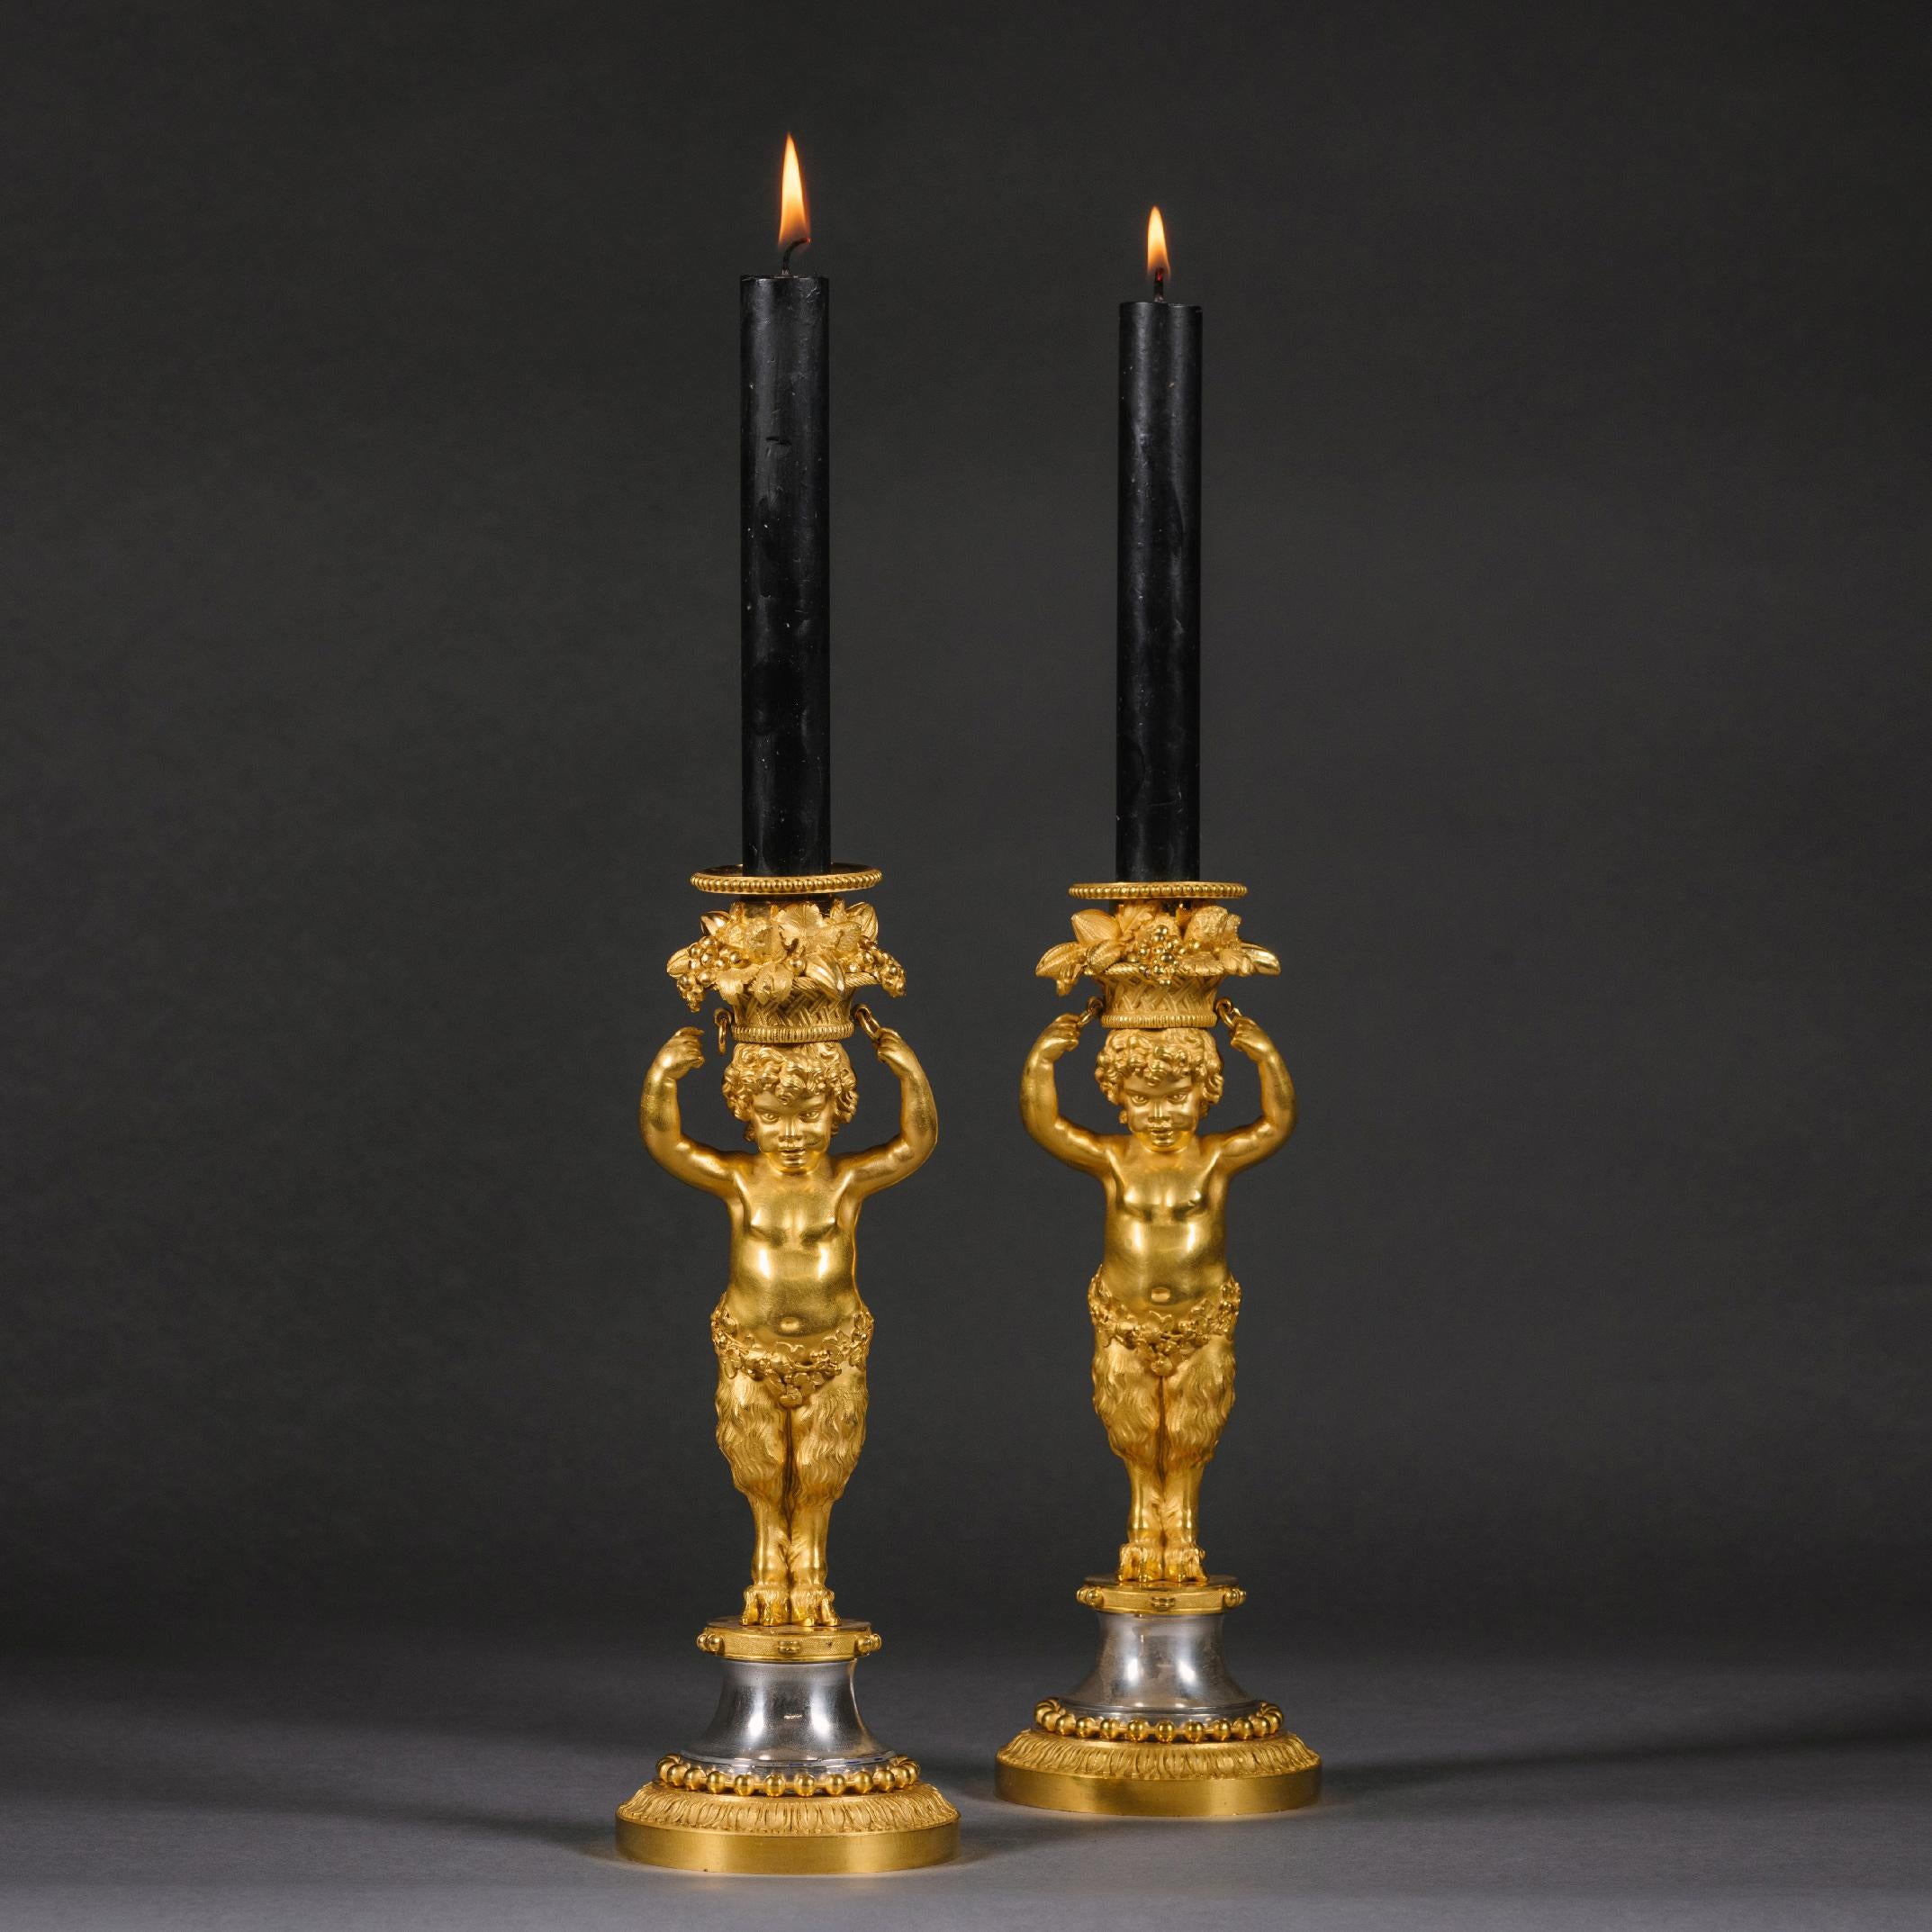 A Pair of Louis XVI style gilt-bronze and polished steel candlesticks
By Emmanuel-Alfred (dit Alfred II) Beurdeley.

Stamped 'BY' for Beurdeley. 

Each modelled as a bacchic putto standing on a tambourine holding atop his head a basket of fruit